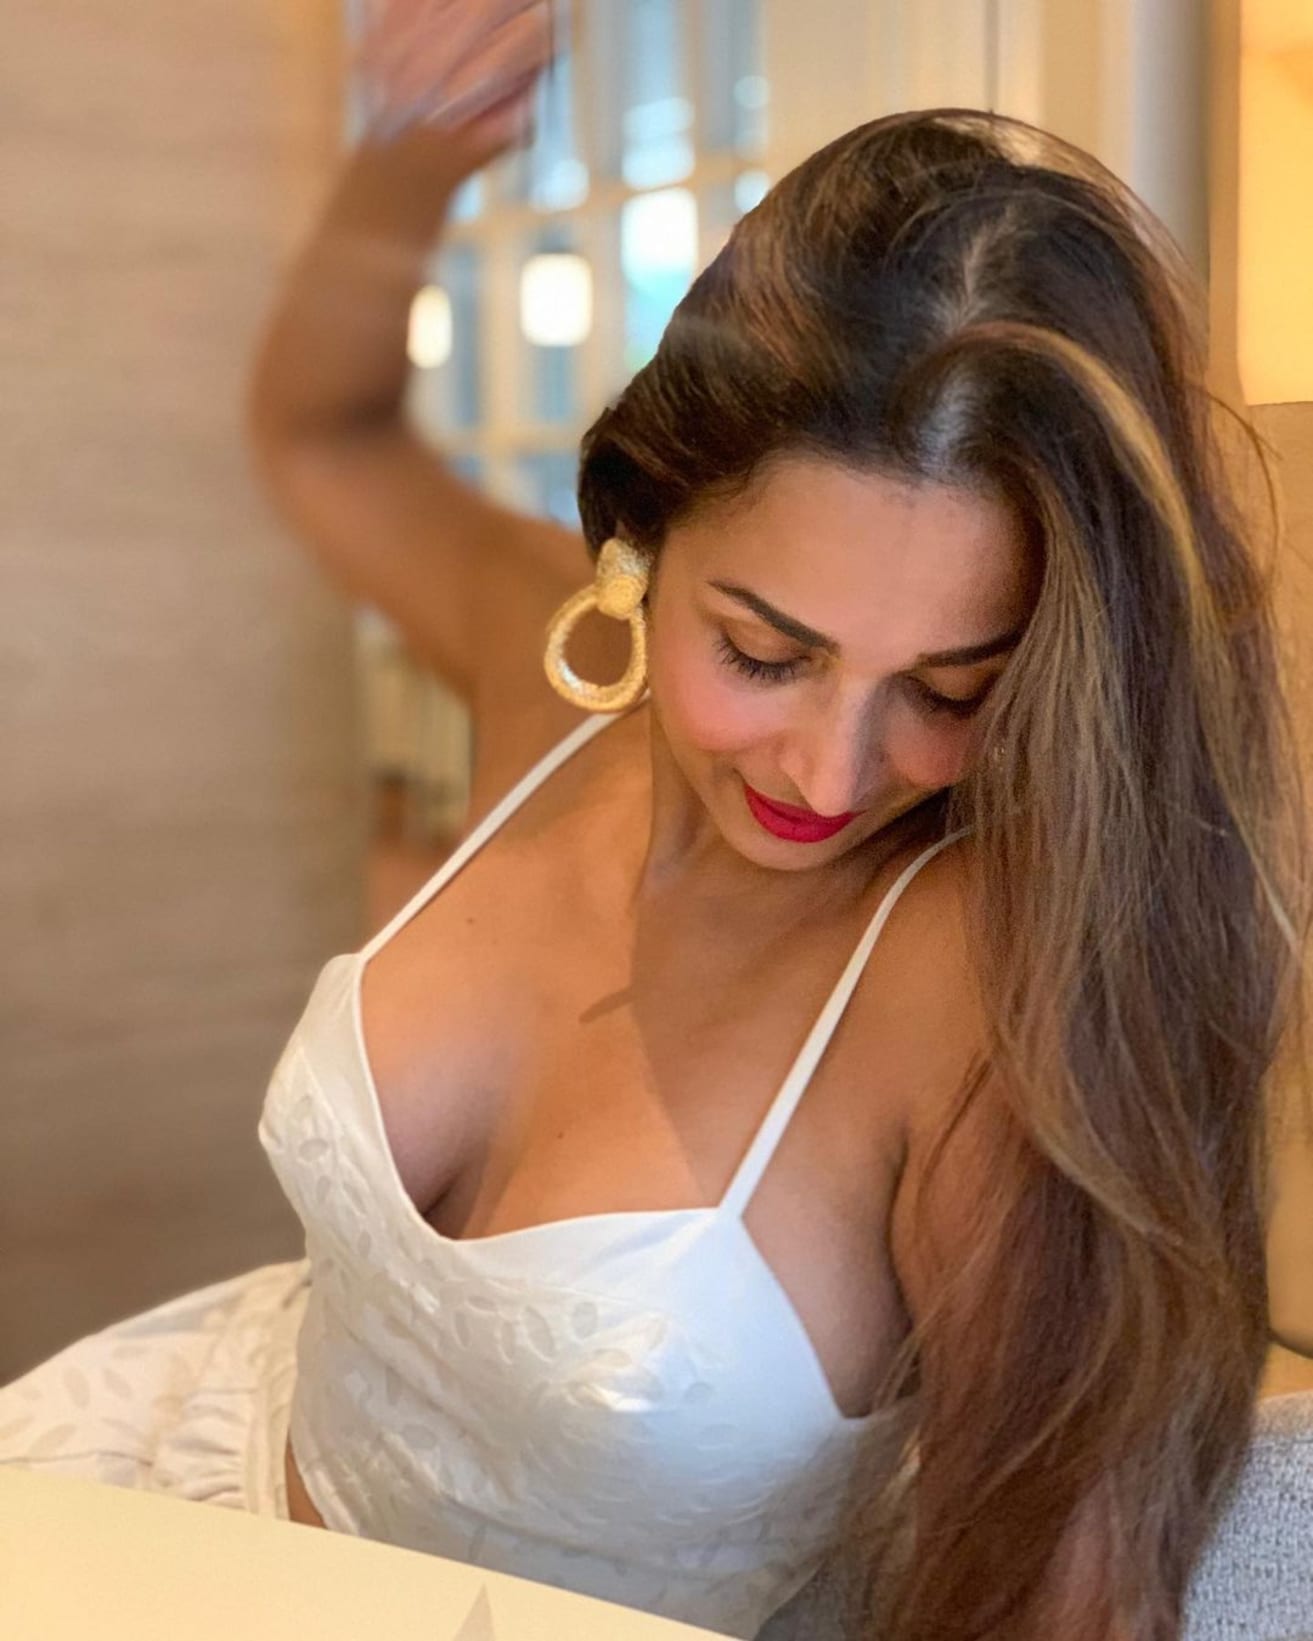 Malaika Arora Looks Chic In These Candid Photos, Check Out Diva's Stunning Pics